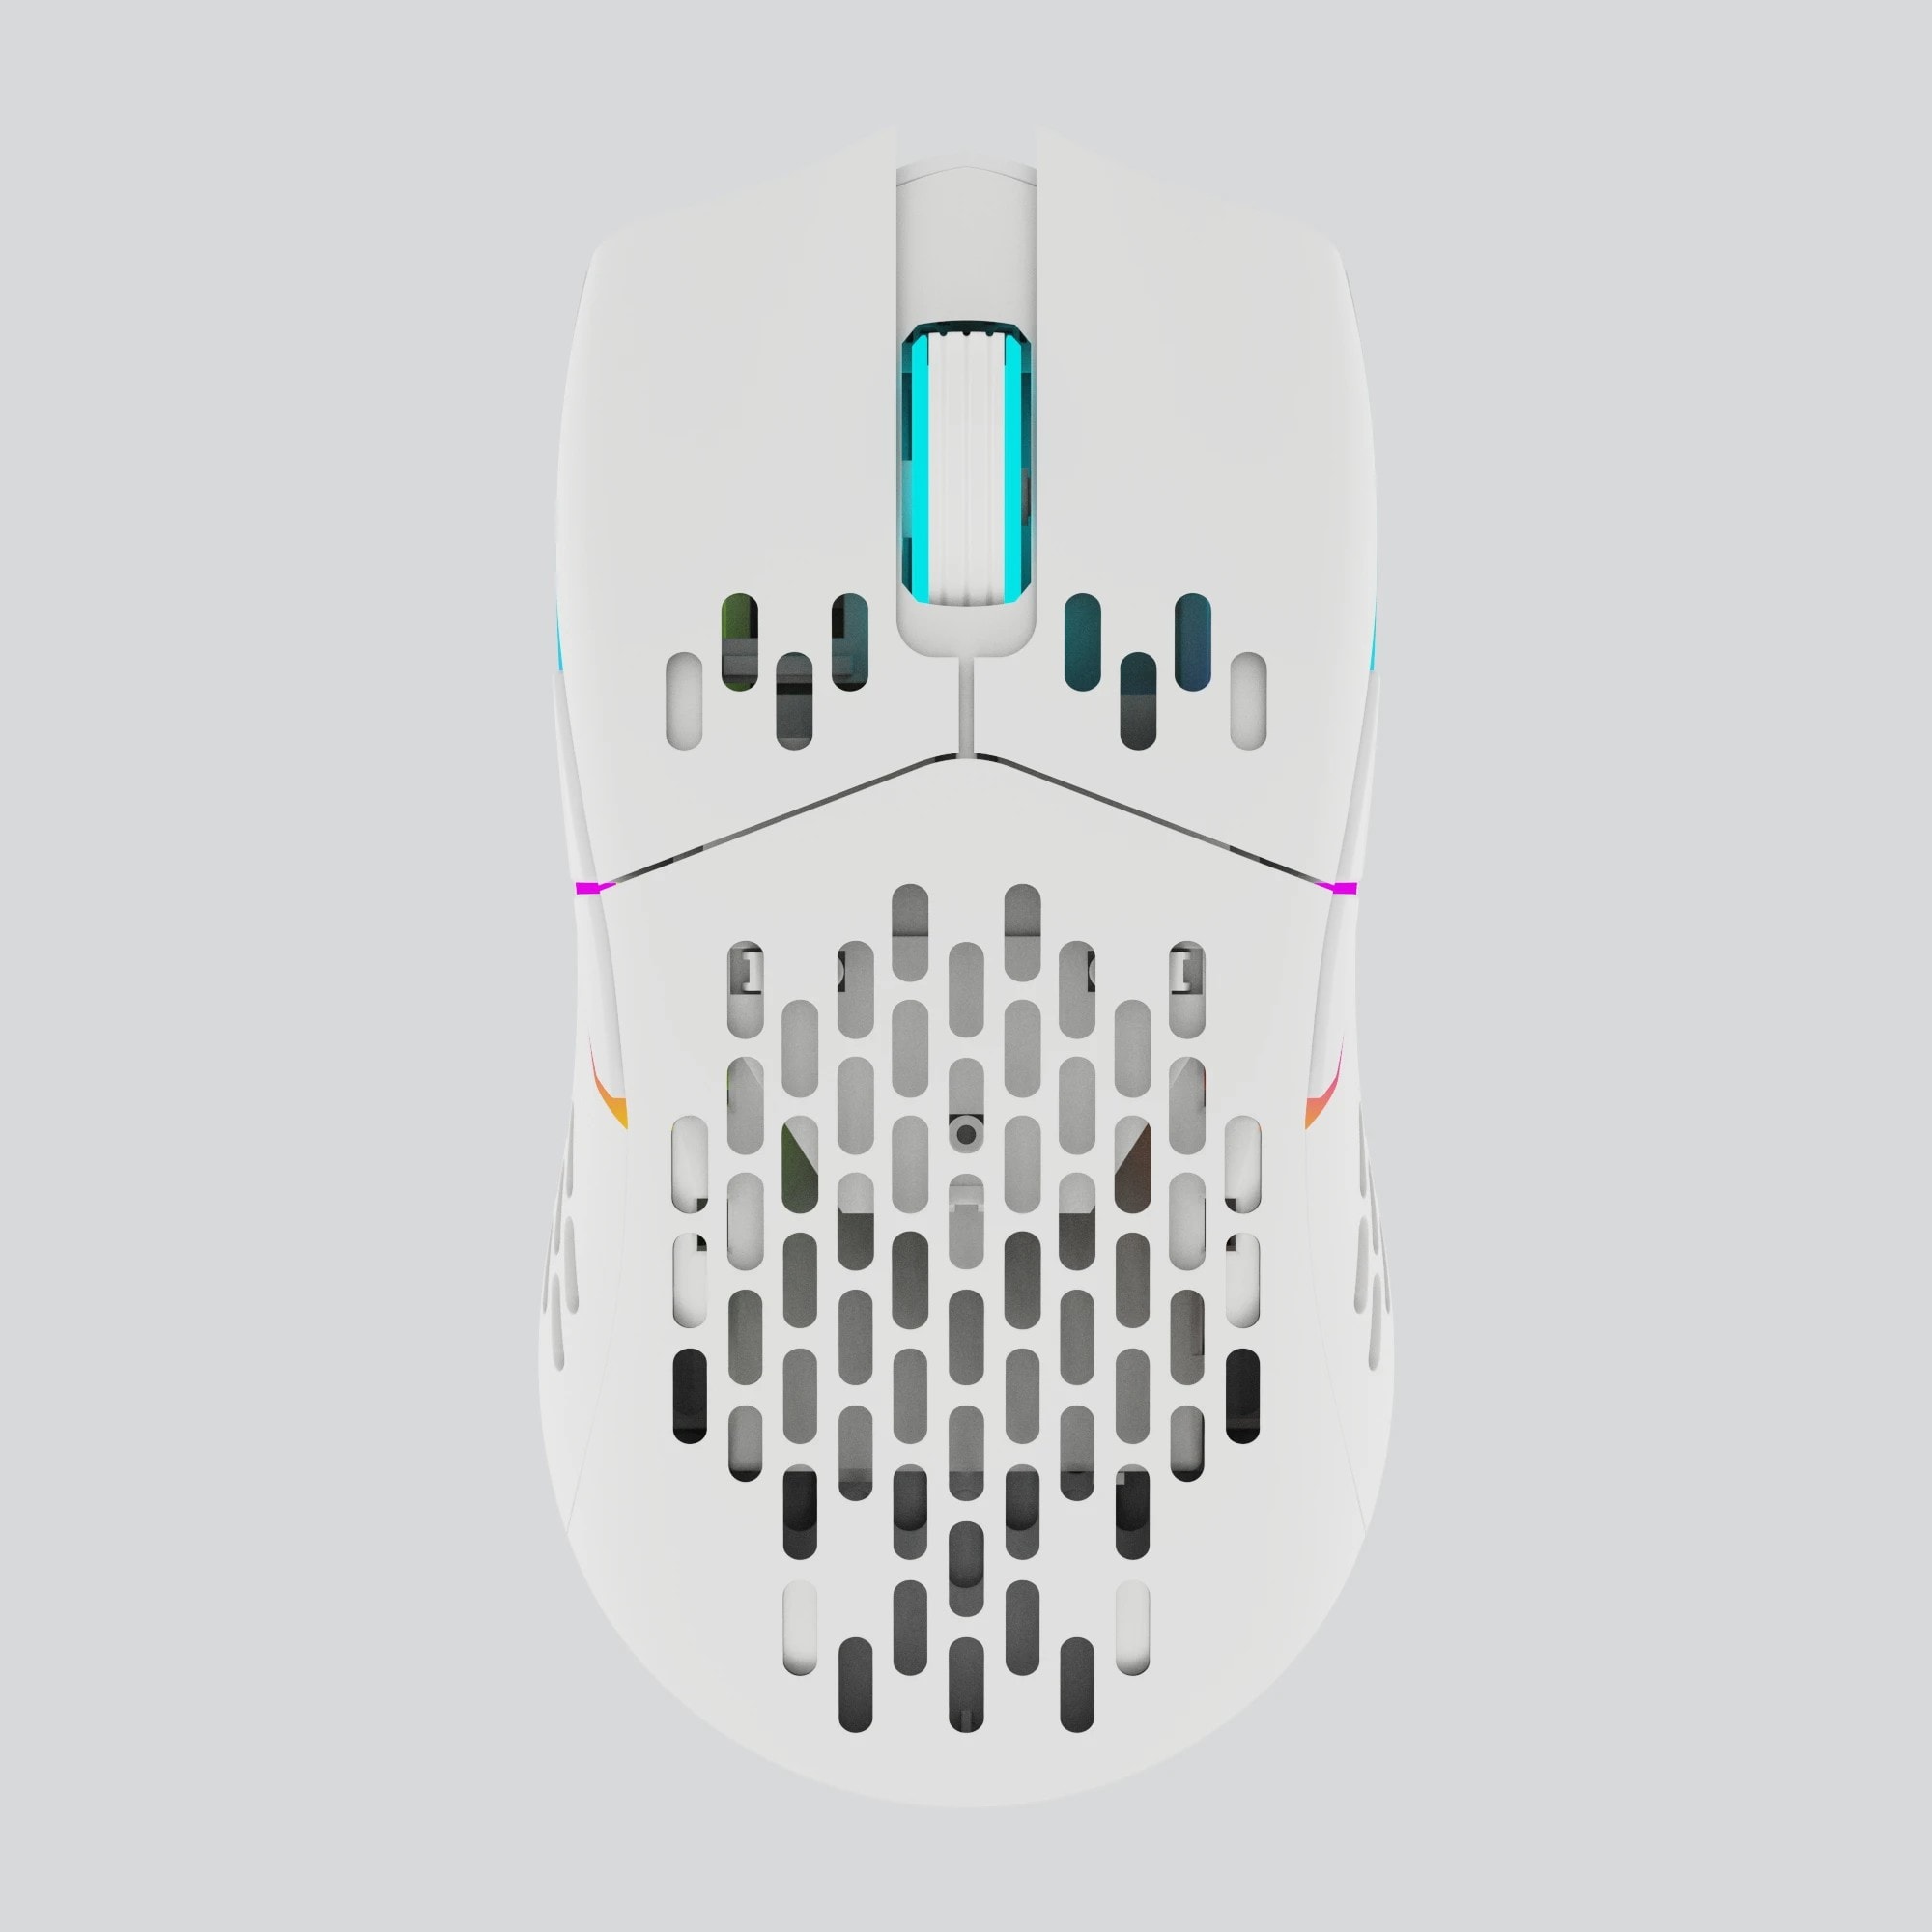 The Keychron M1 mouse comes in black or white colors. 